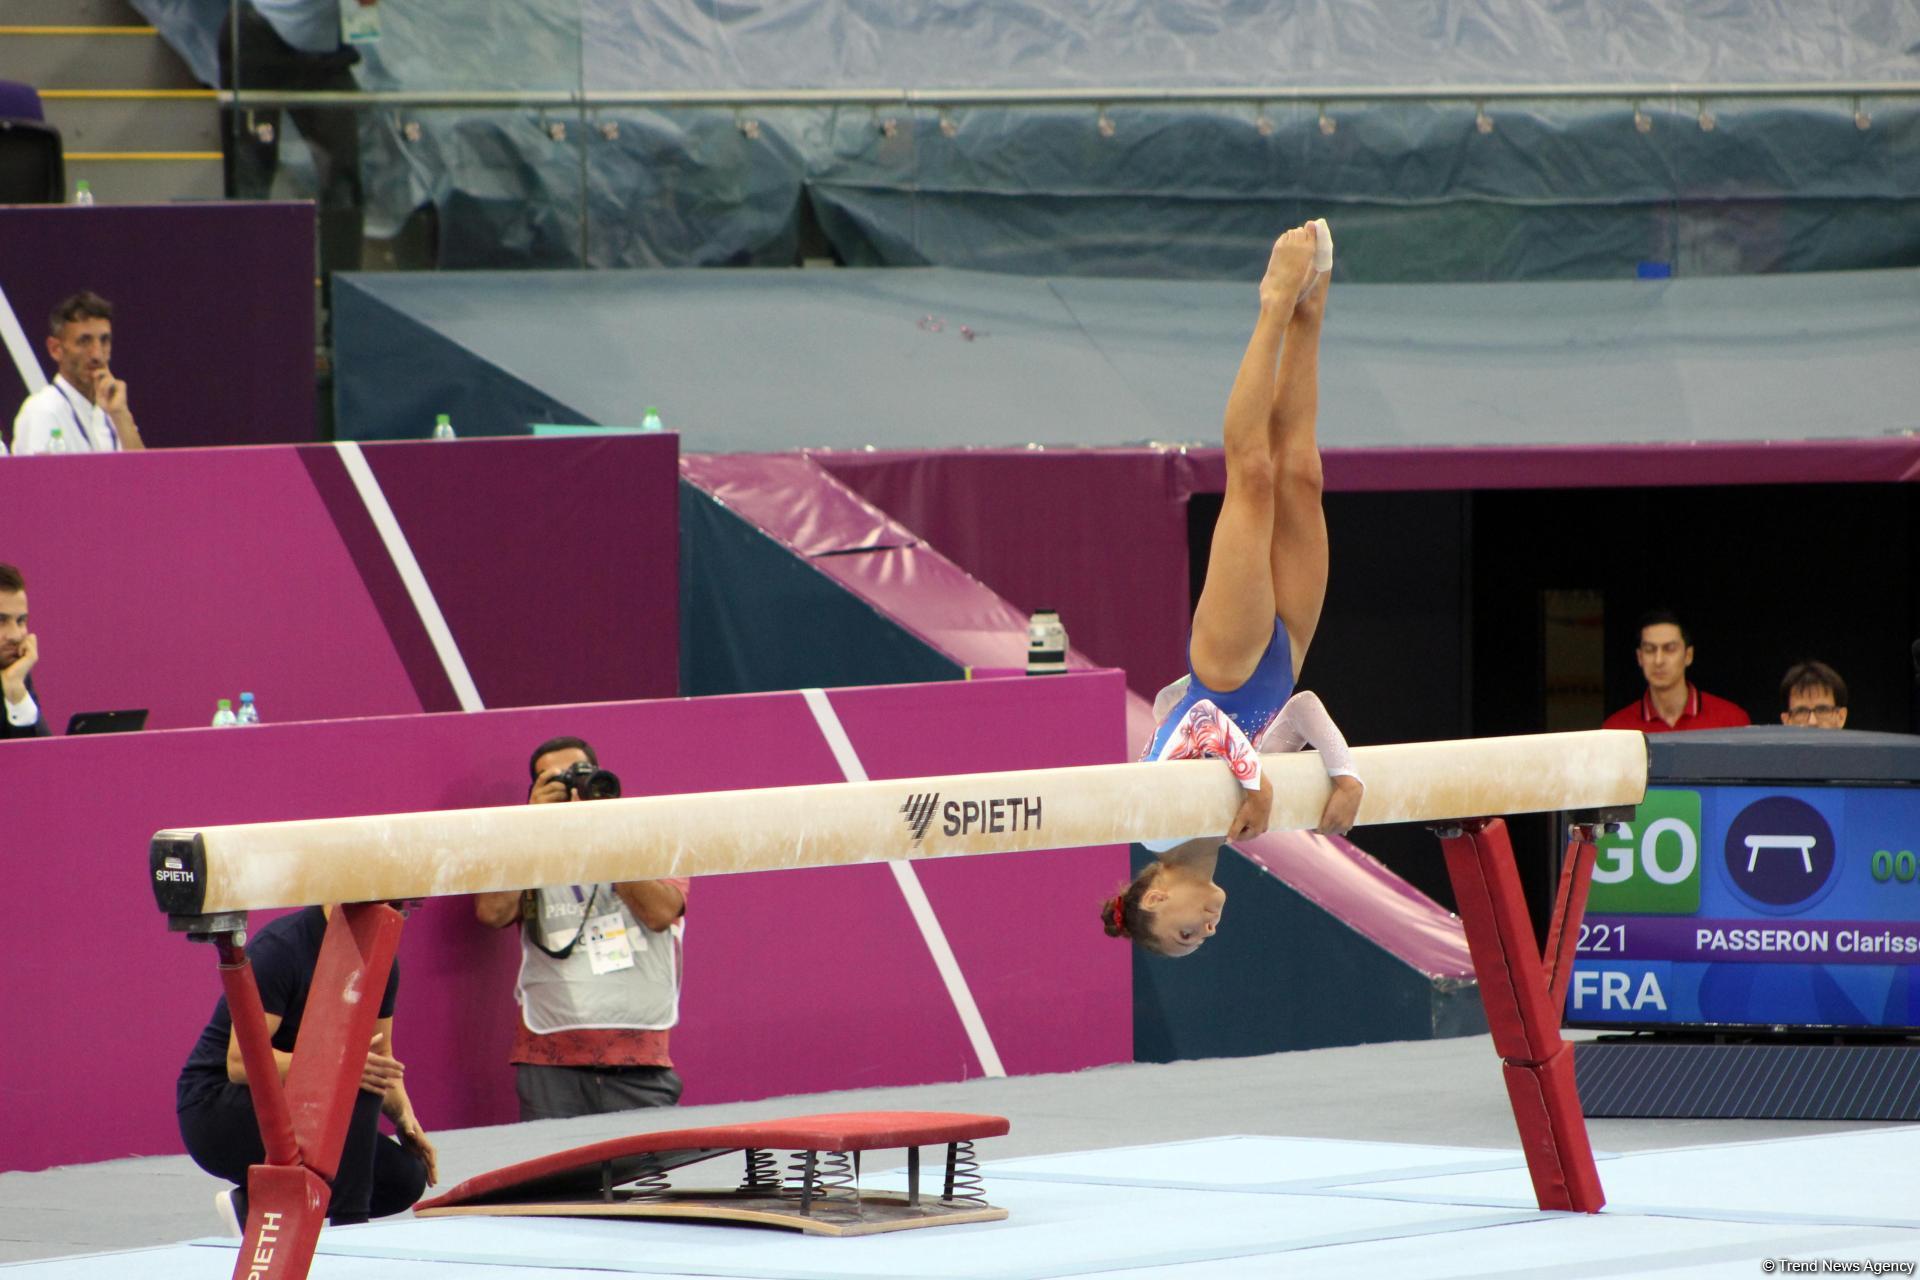 Final day of artistic gymnastics competitions kick off as part of EYOF Baku 2019 (PHOTO)